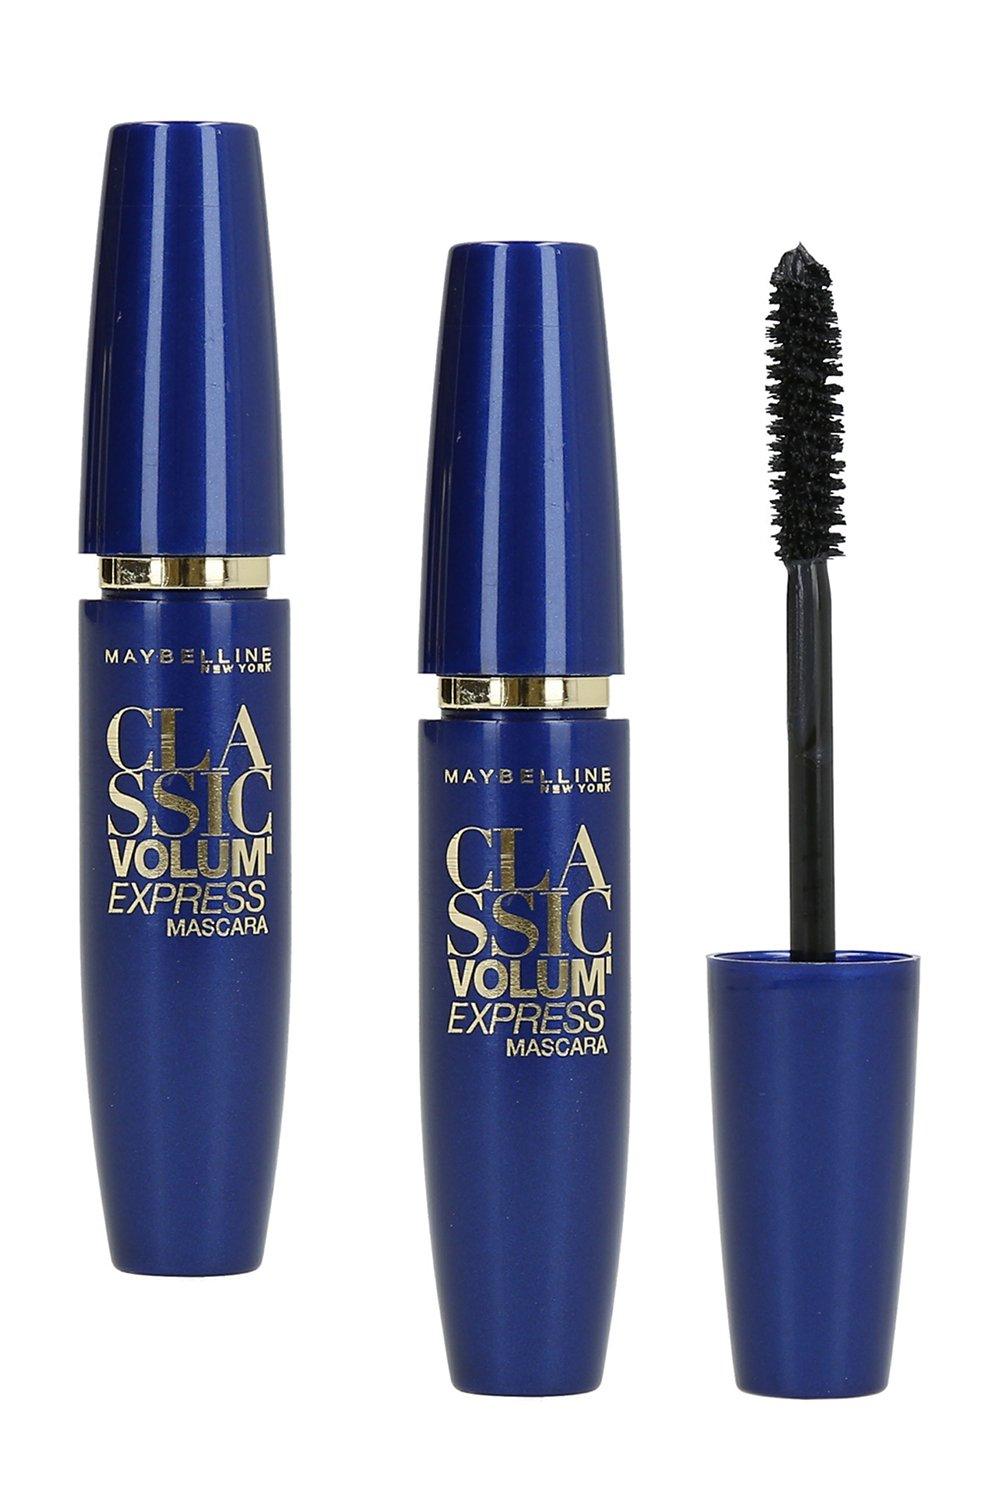 maybelline classic volume express black mascara twin pack